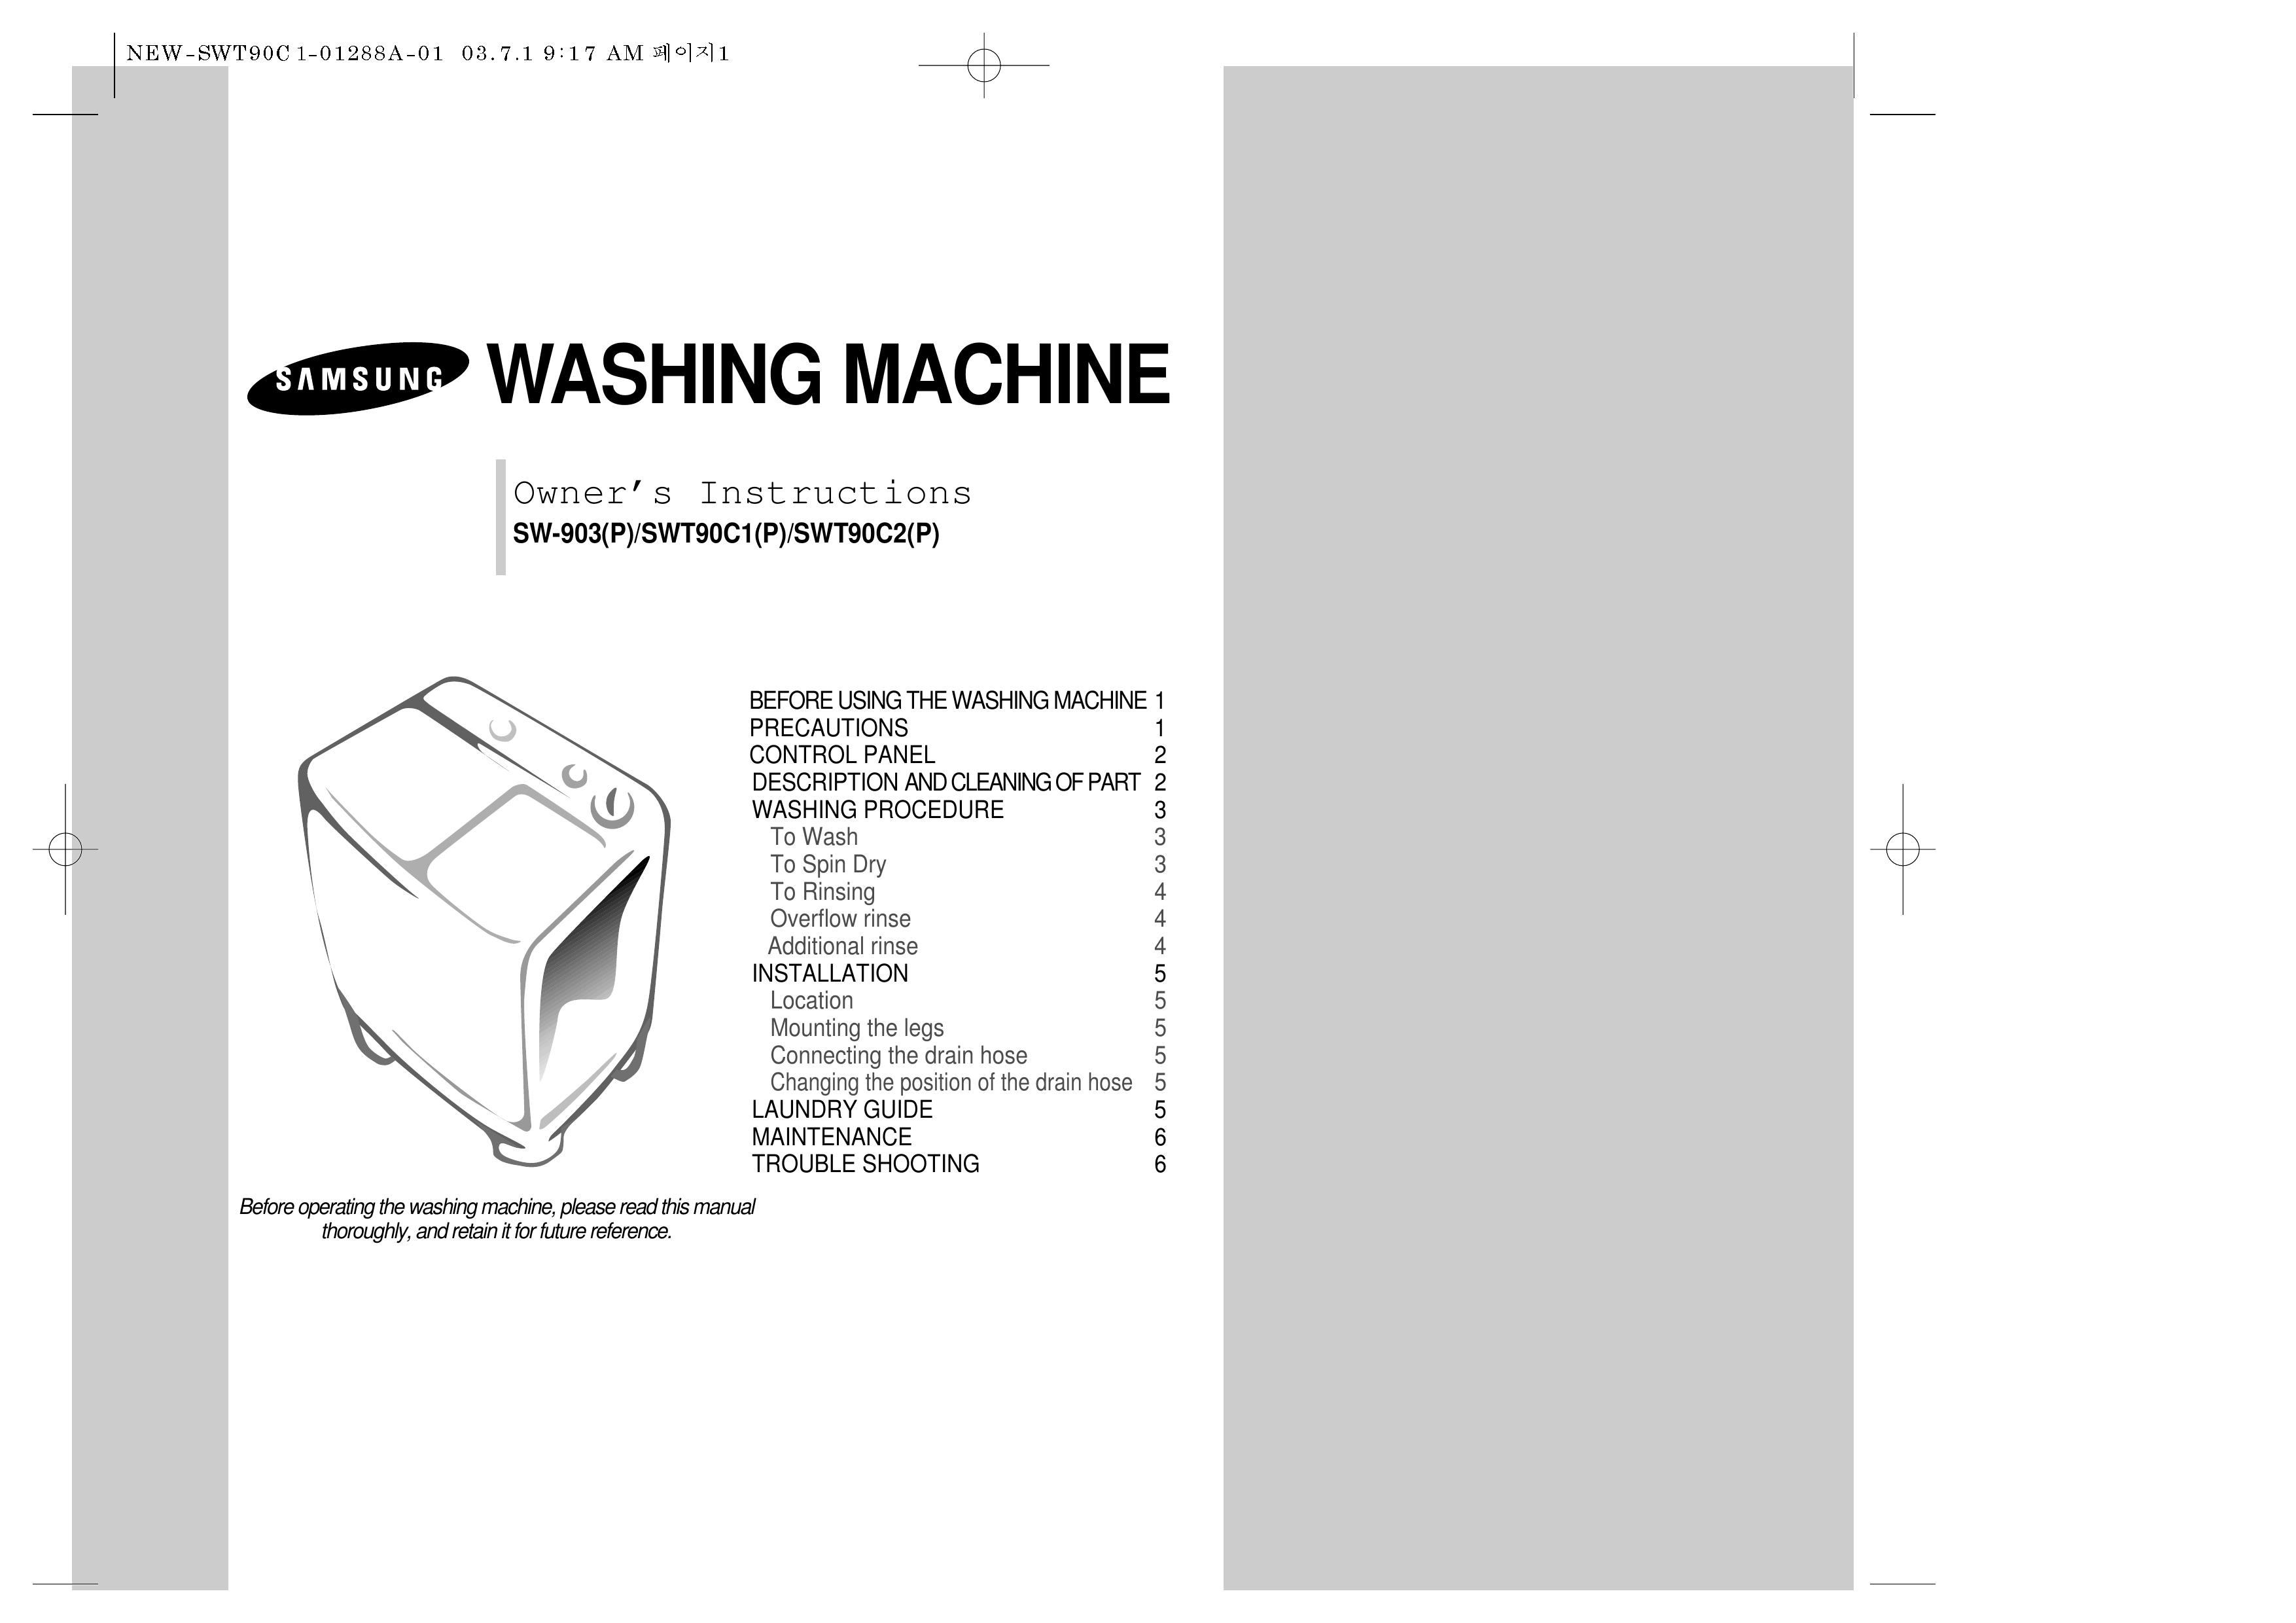 Samsung SWT90C1(P) Washer/Dryer User Manual (Page 1)